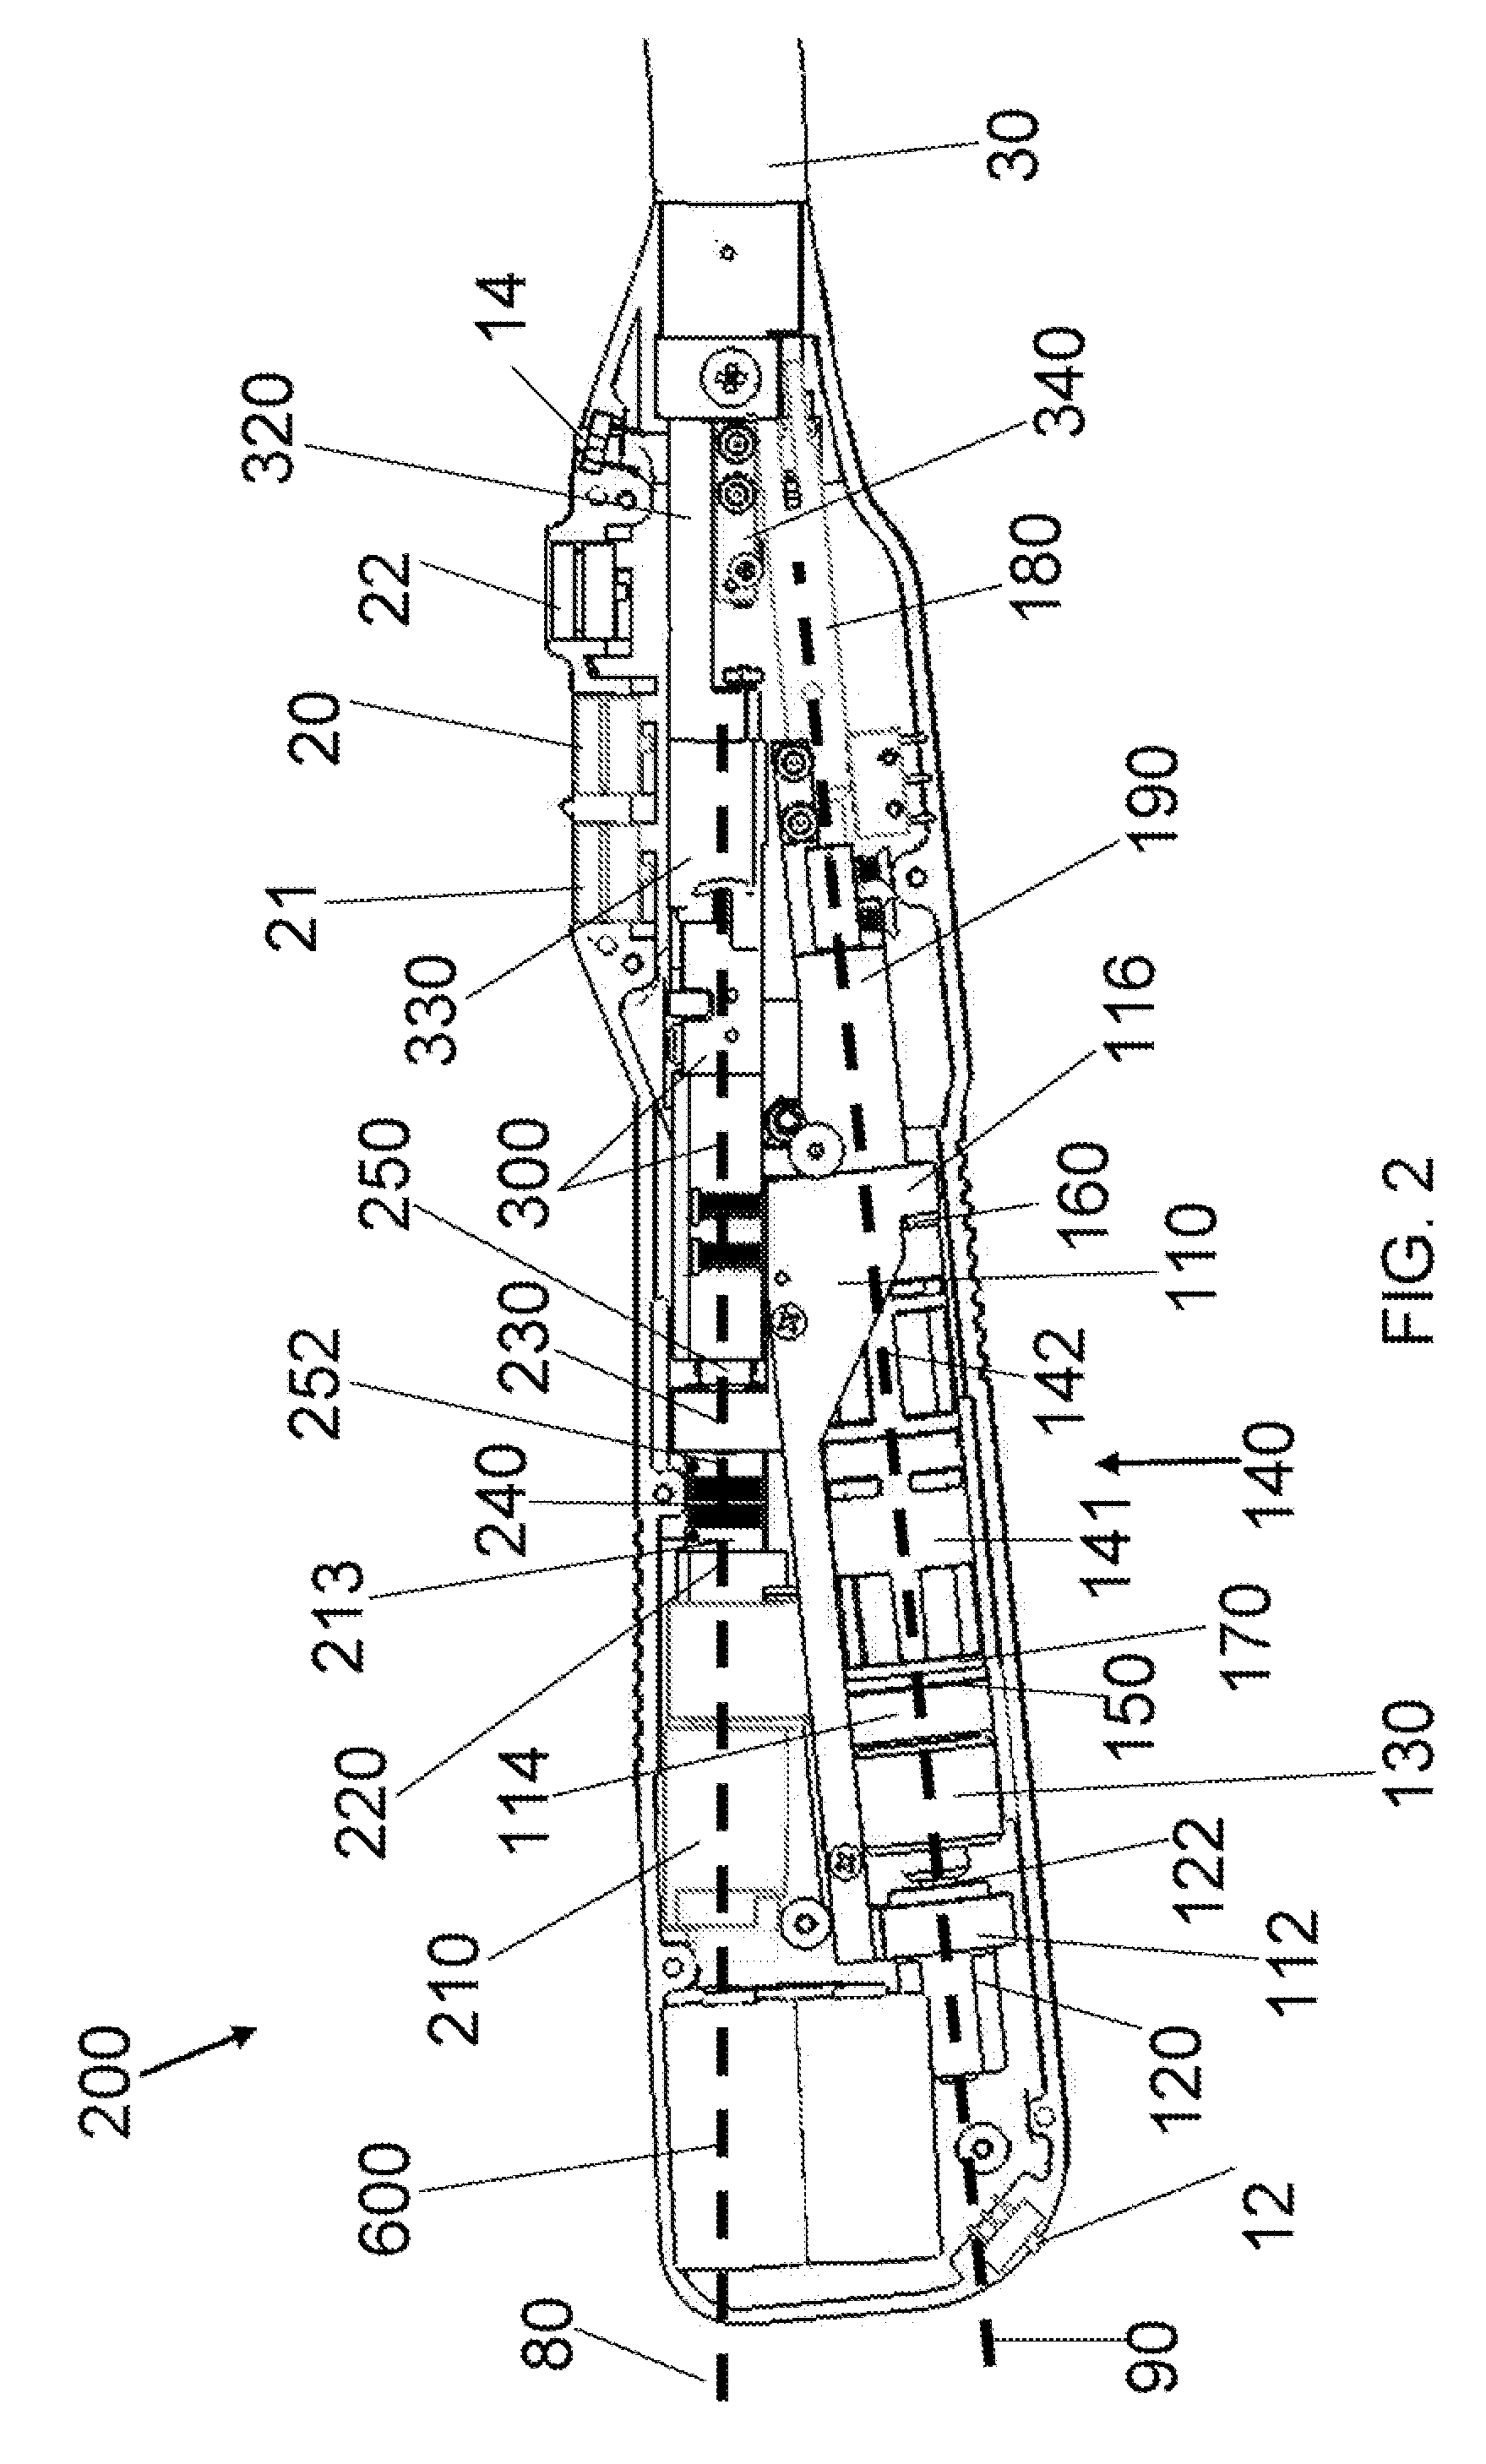 Electrically Self-Powered Surgical Instrument With Manual Release